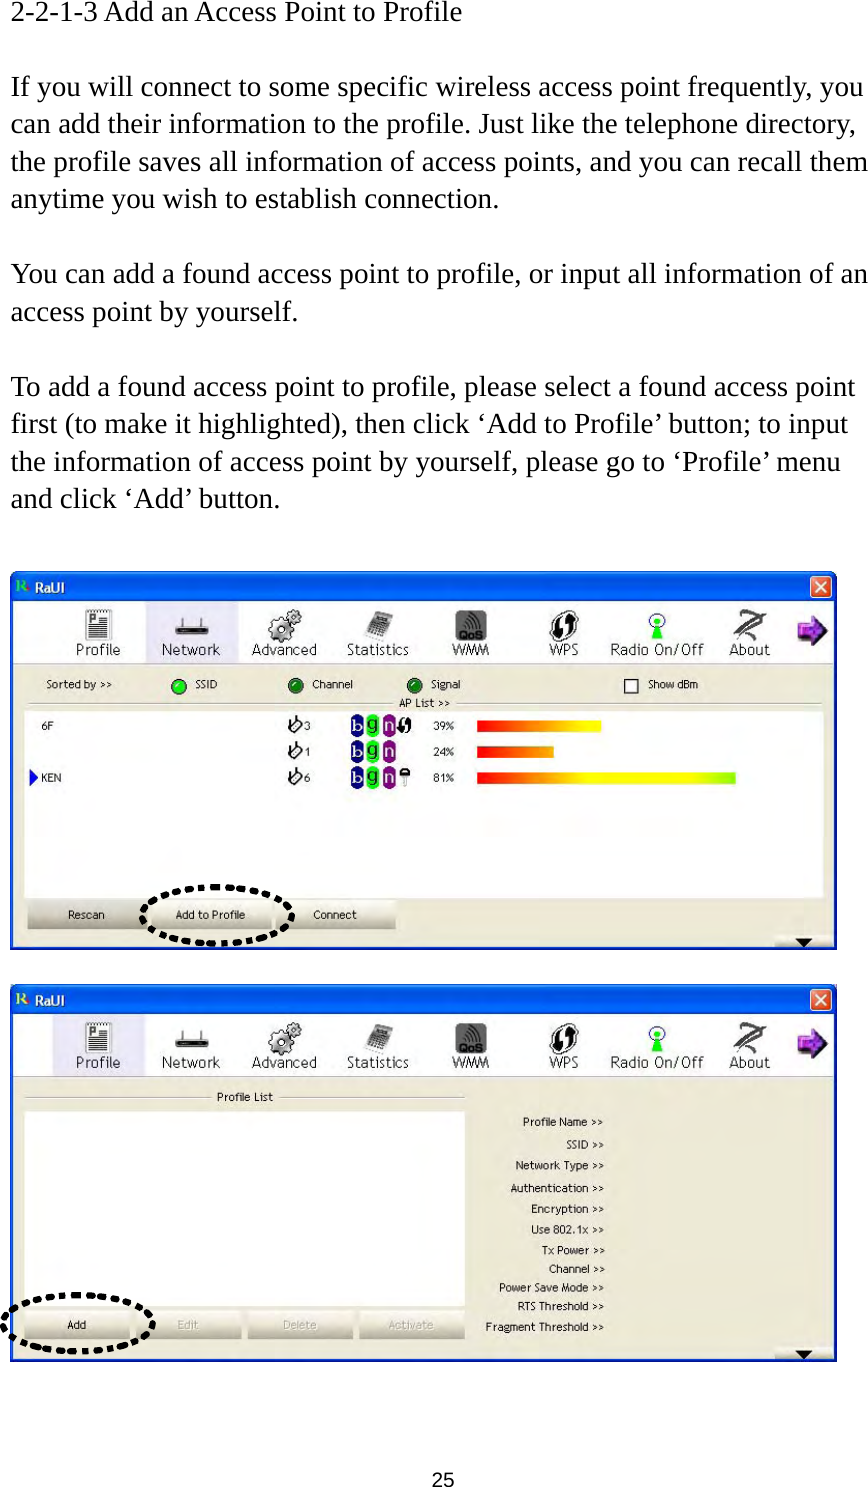  25 2-2-1-3 Add an Access Point to Profile  If you will connect to some specific wireless access point frequently, you can add their information to the profile. Just like the telephone directory, the profile saves all information of access points, and you can recall them anytime you wish to establish connection.  You can add a found access point to profile, or input all information of an access point by yourself.    To add a found access point to profile, please select a found access point first (to make it highlighted), then click ‘Add to Profile’ button; to input the information of access point by yourself, please go to ‘Profile’ menu and click ‘Add’ button.       